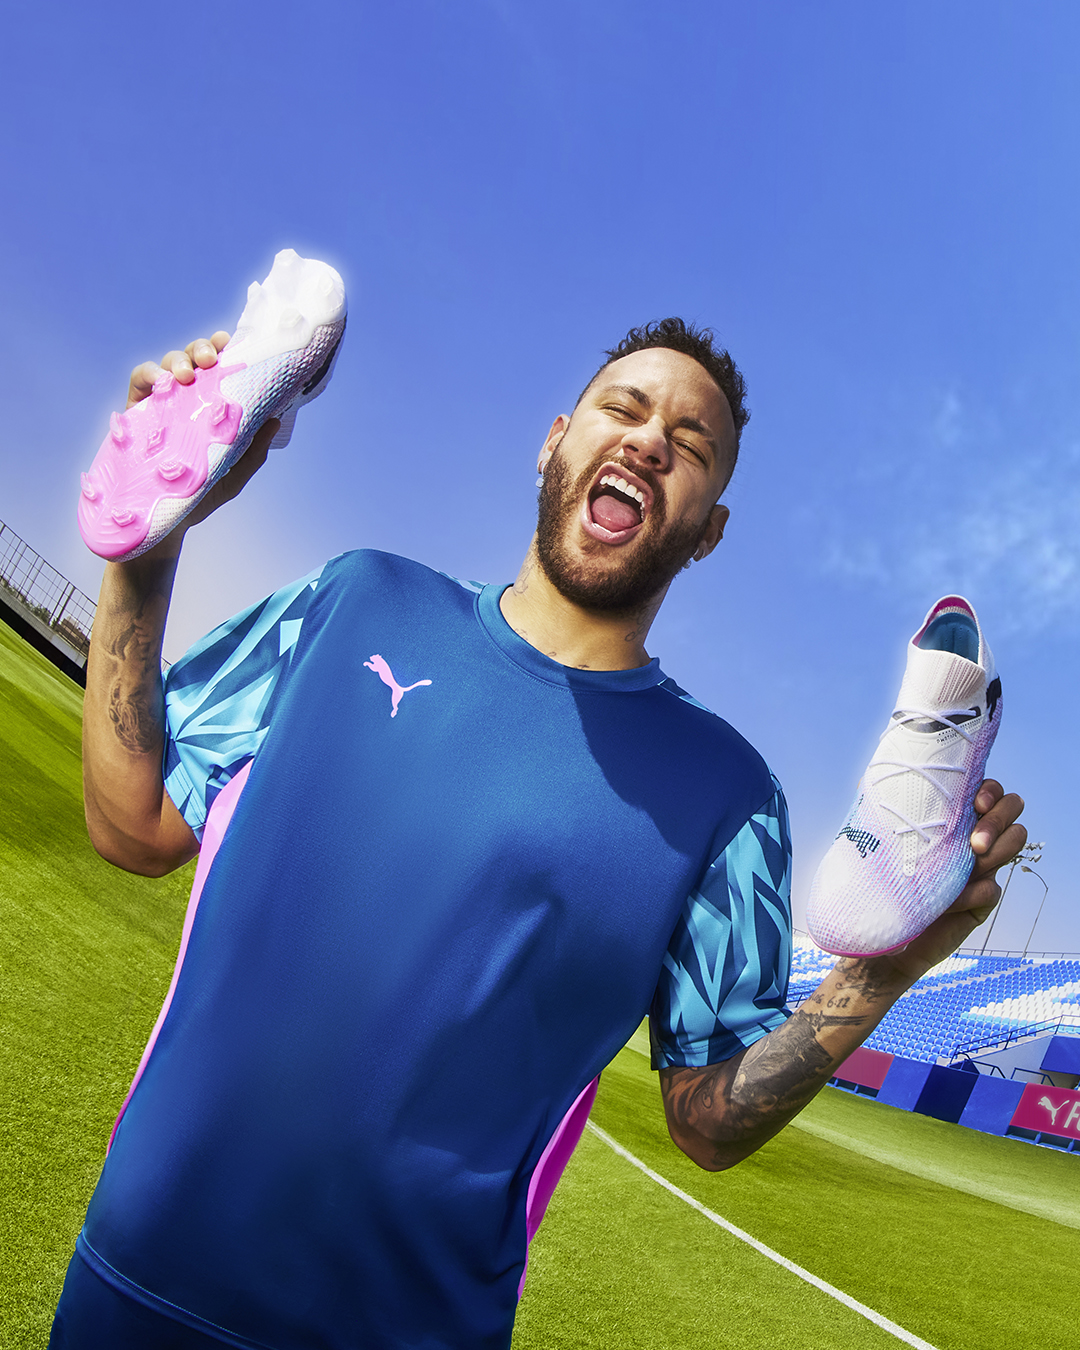 Puma Launches New Future 7 Football Boot With Phenomenal Pack – Footwear  News